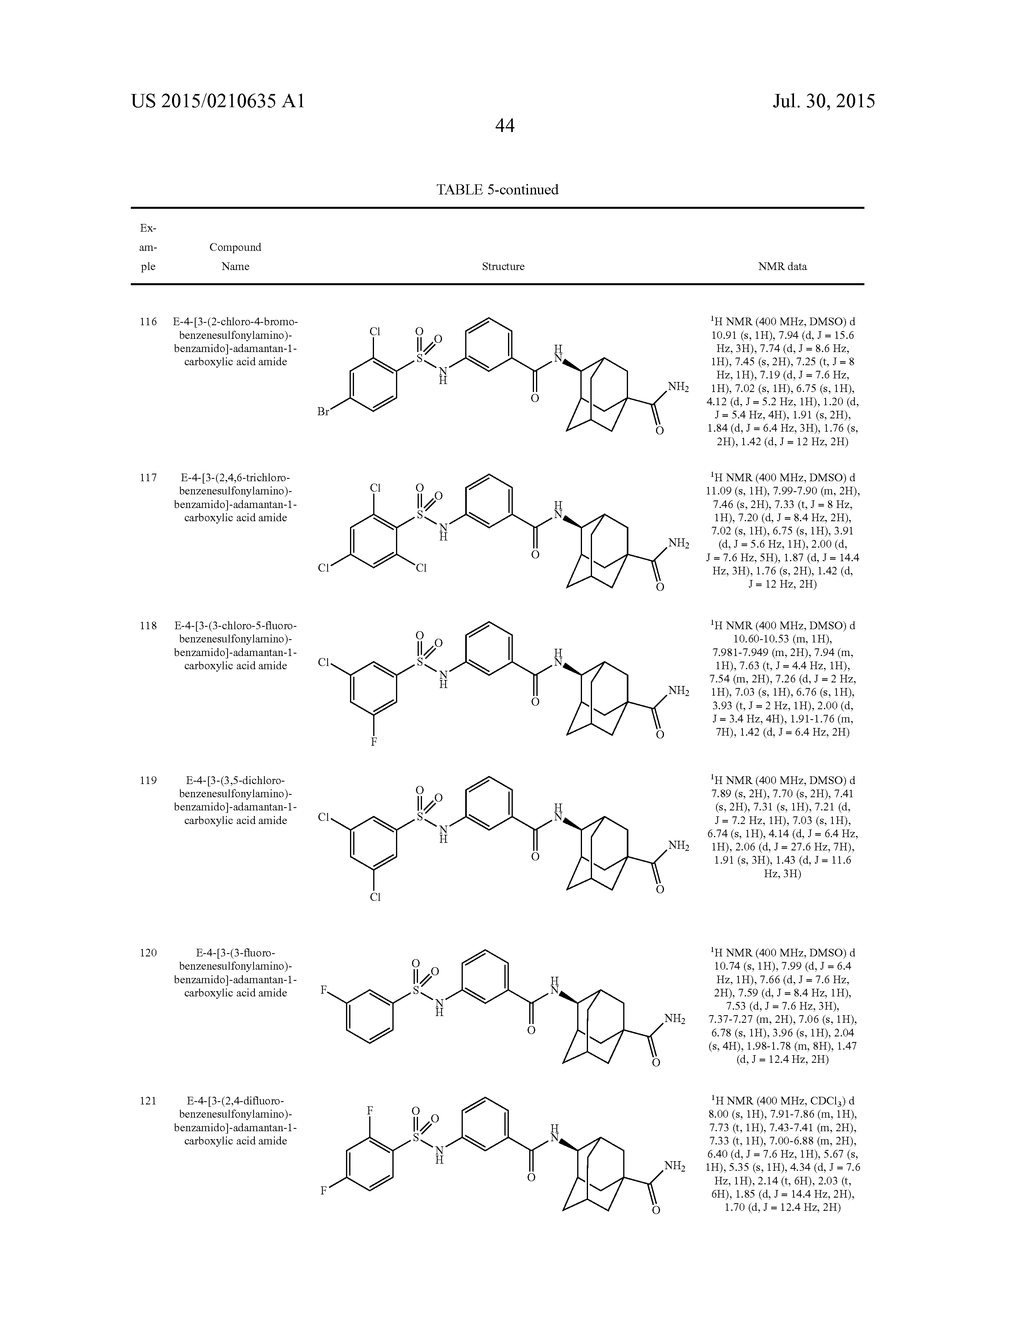 NOVEL COMPOUND HAVING ABILITY TO INHIBIT 11B-HSD1 ENZYME OR     PHARMACEUTICALLY ACCEPTABLE SALT THEREOF, METHOD FOR PRODUCING SAME, AND     PHARMACEUTICAL COMPOSITION CONTAINING SAME AS ACTIVE INGREDIENT - diagram, schematic, and image 45